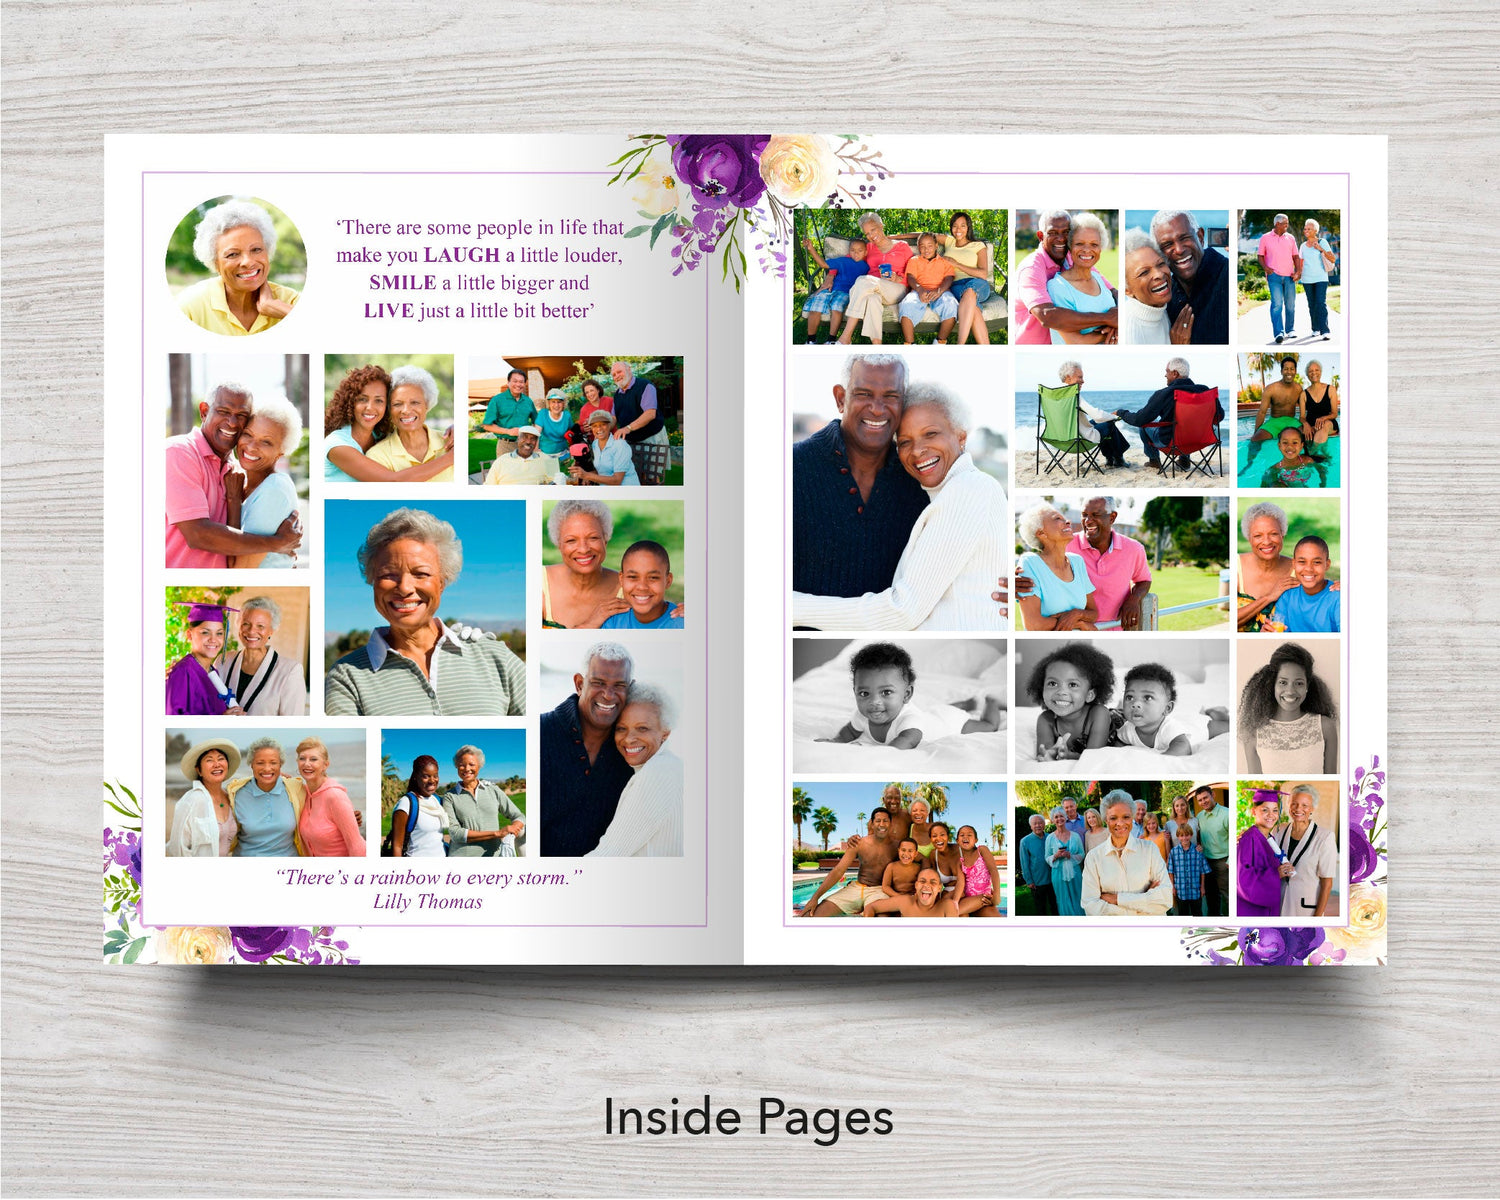 8 Page Purple Bloom Funeral Program Template (11 x 17 inches)